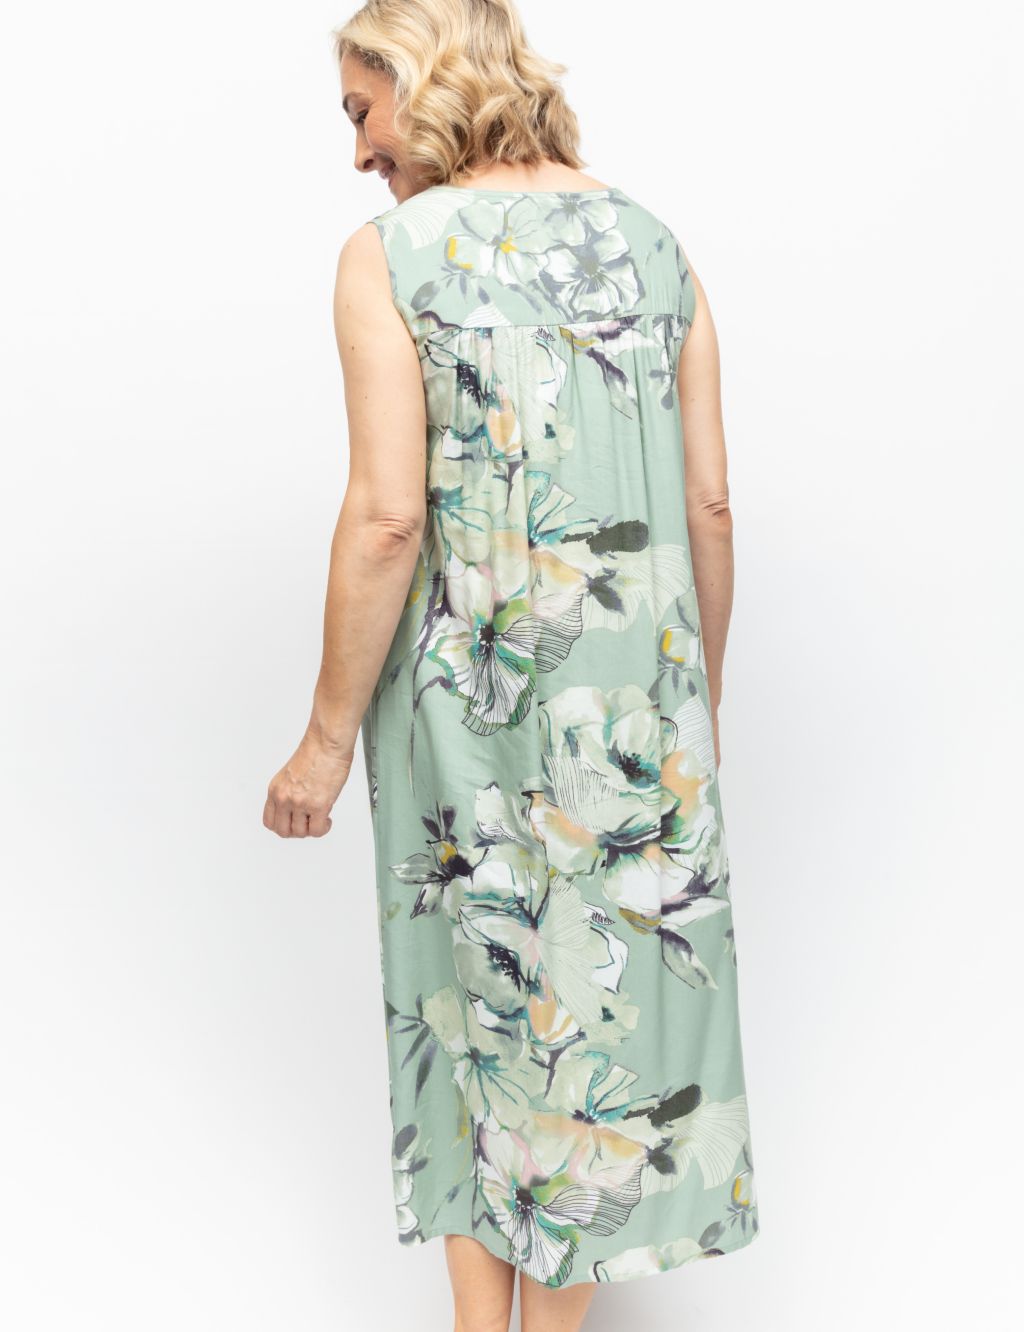 Cotton Modal Floral Nightdress image 4